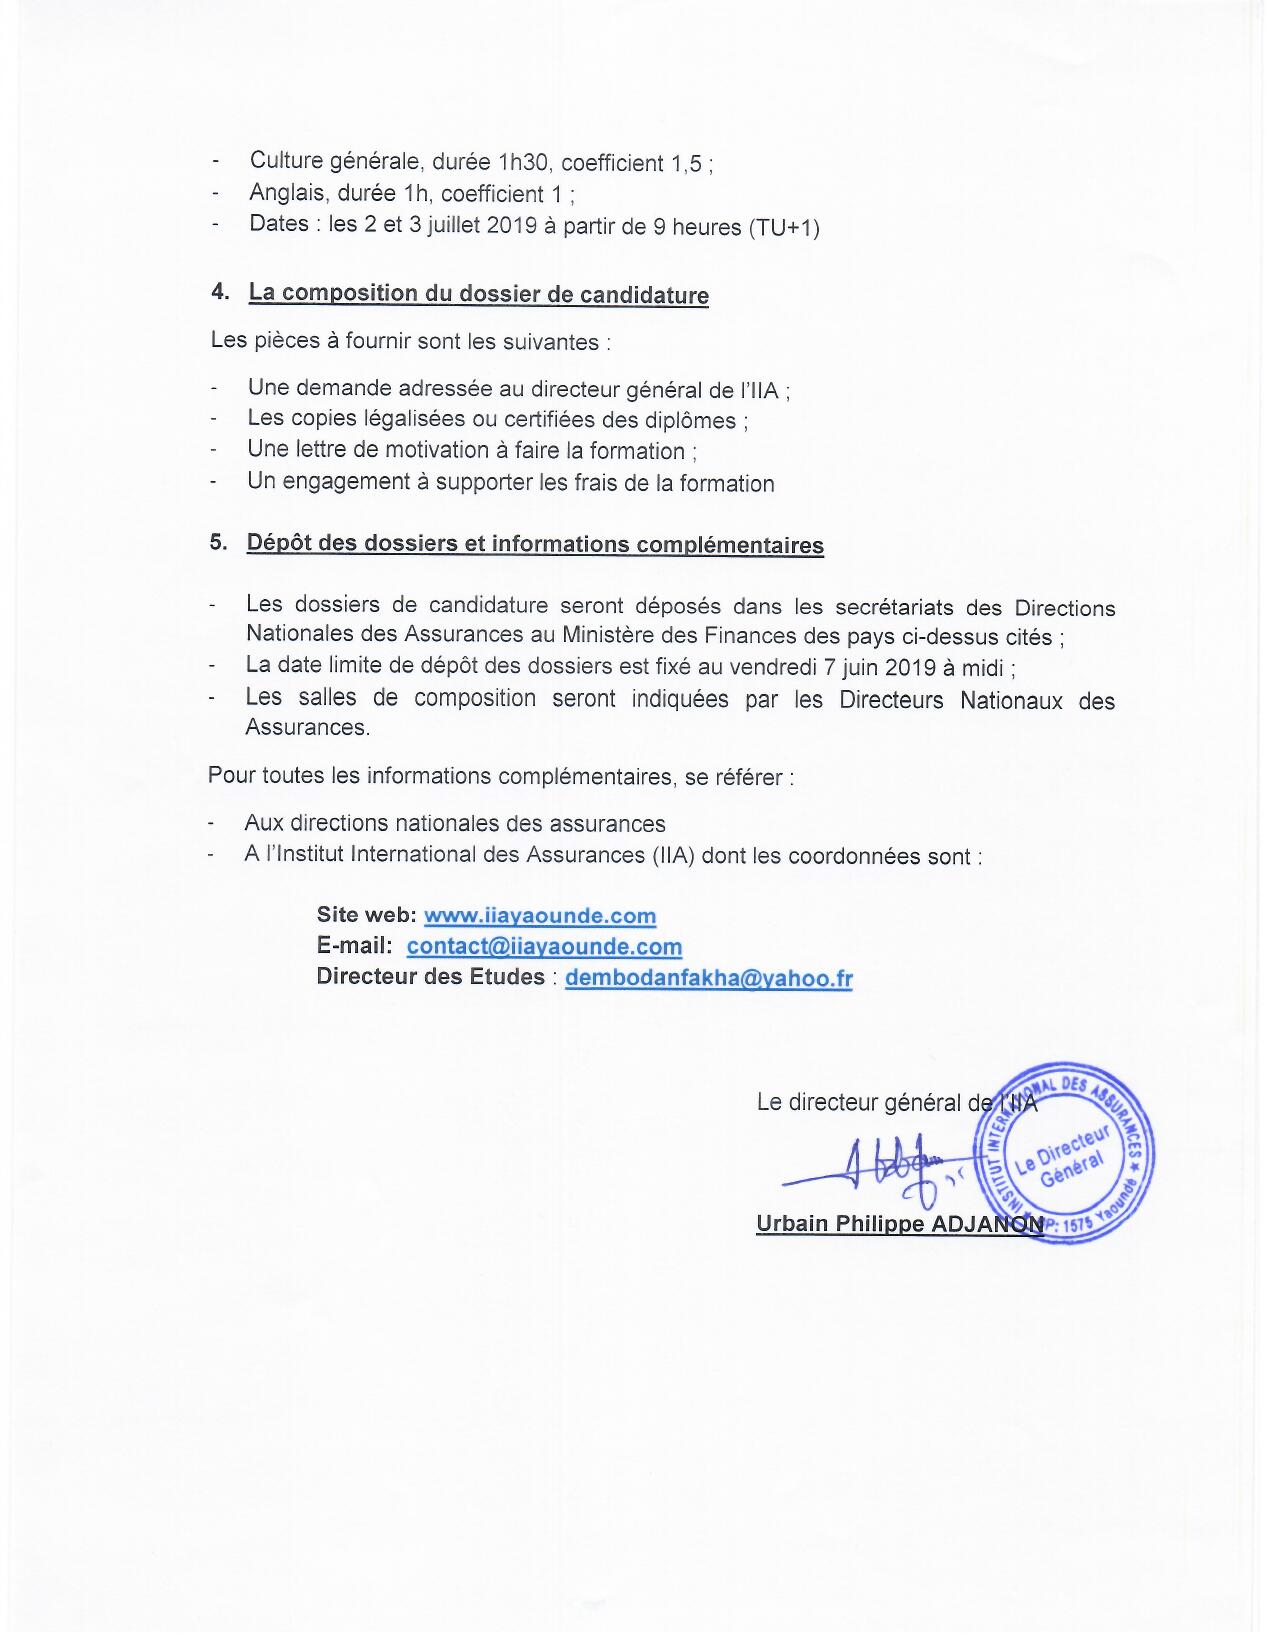 DocFile (2)